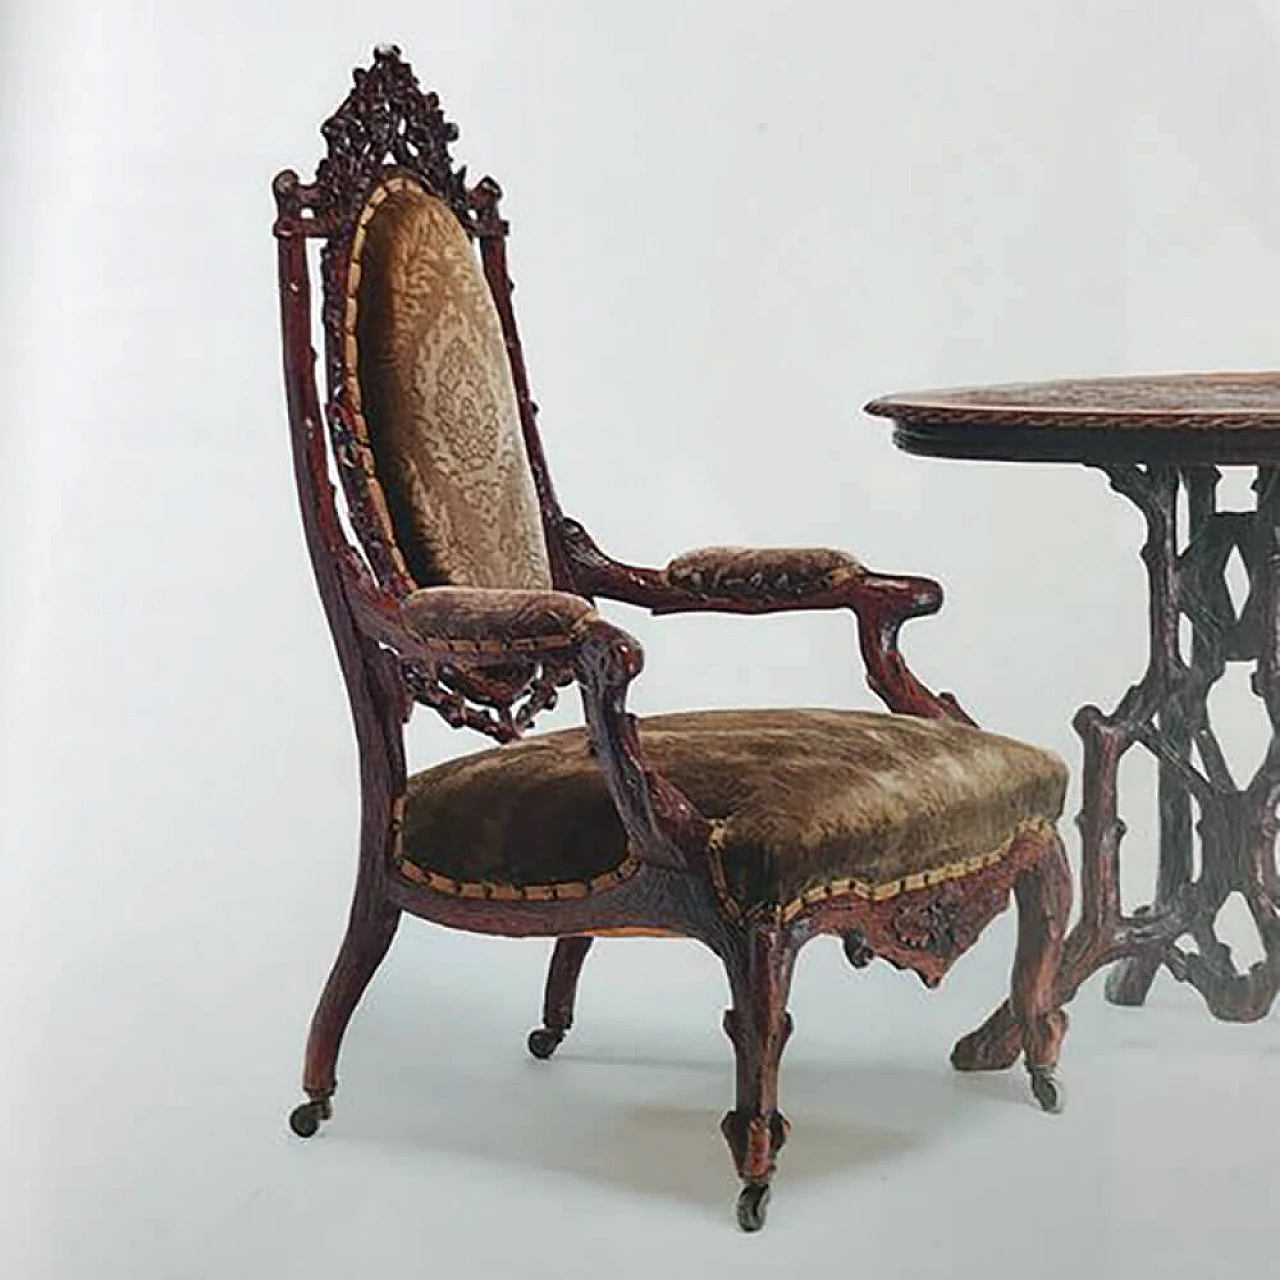 Dutch Black Forest style armchair in walnut and velvet by Gebroeders Horrix, 19th century 1236015